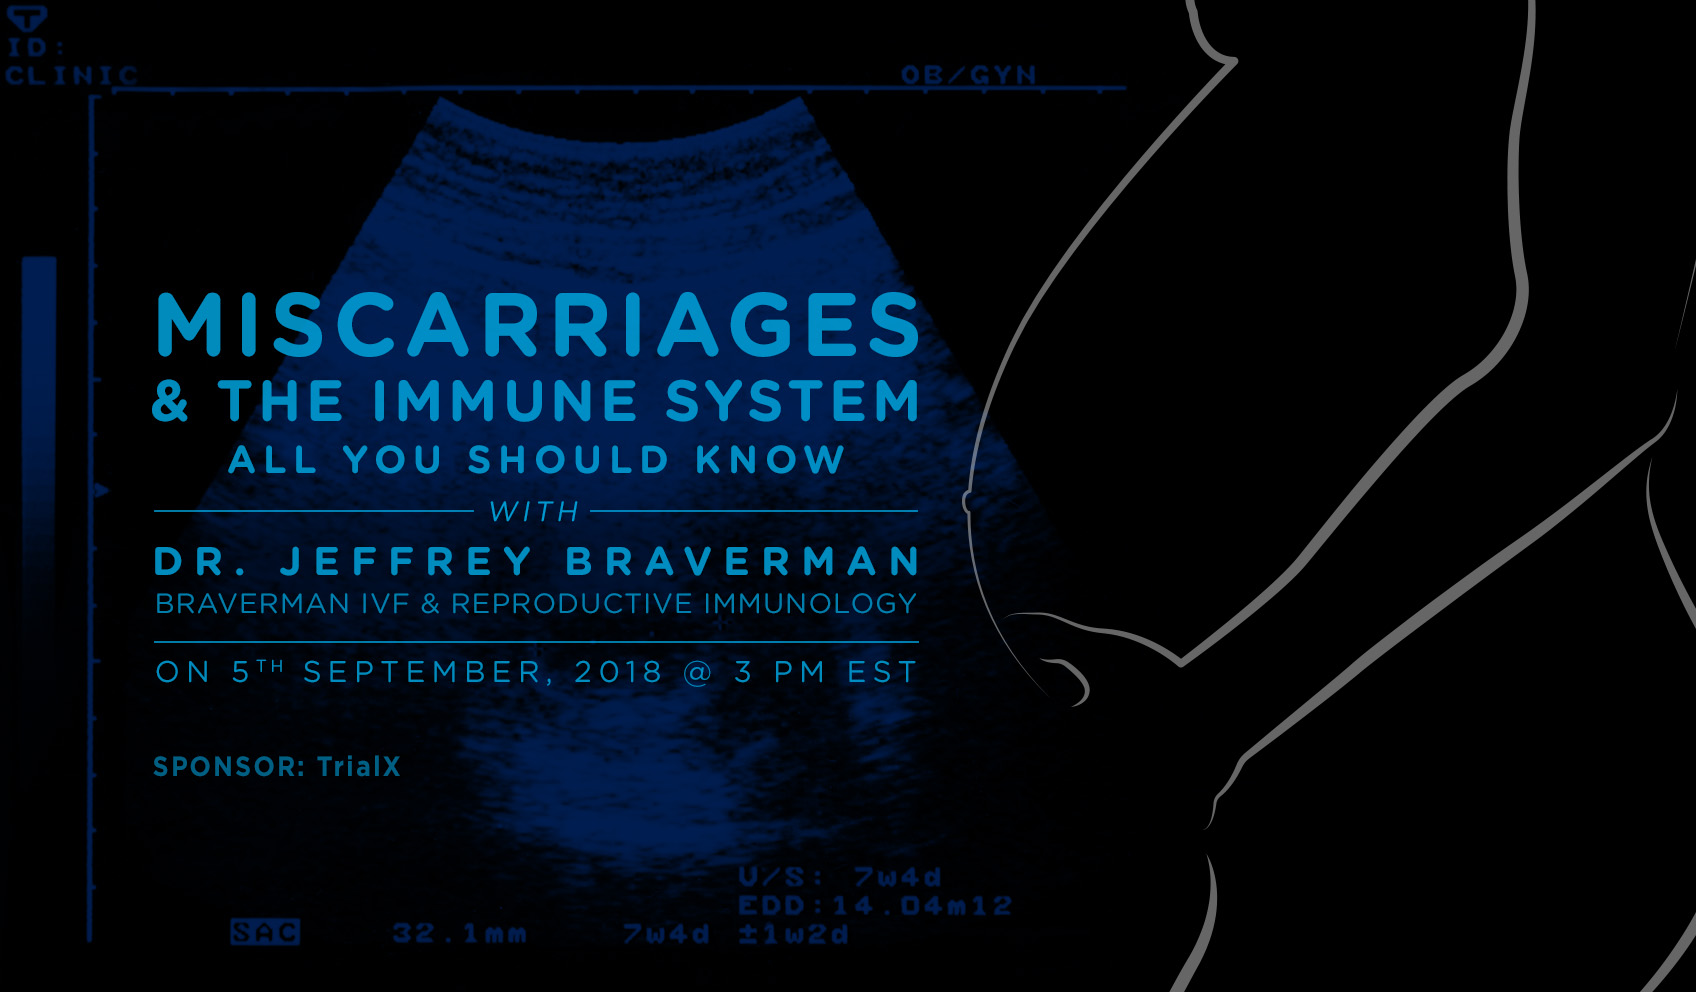 Miscarriages & the Immune System – All You Should Know with Dr. Jeffrey Braverman